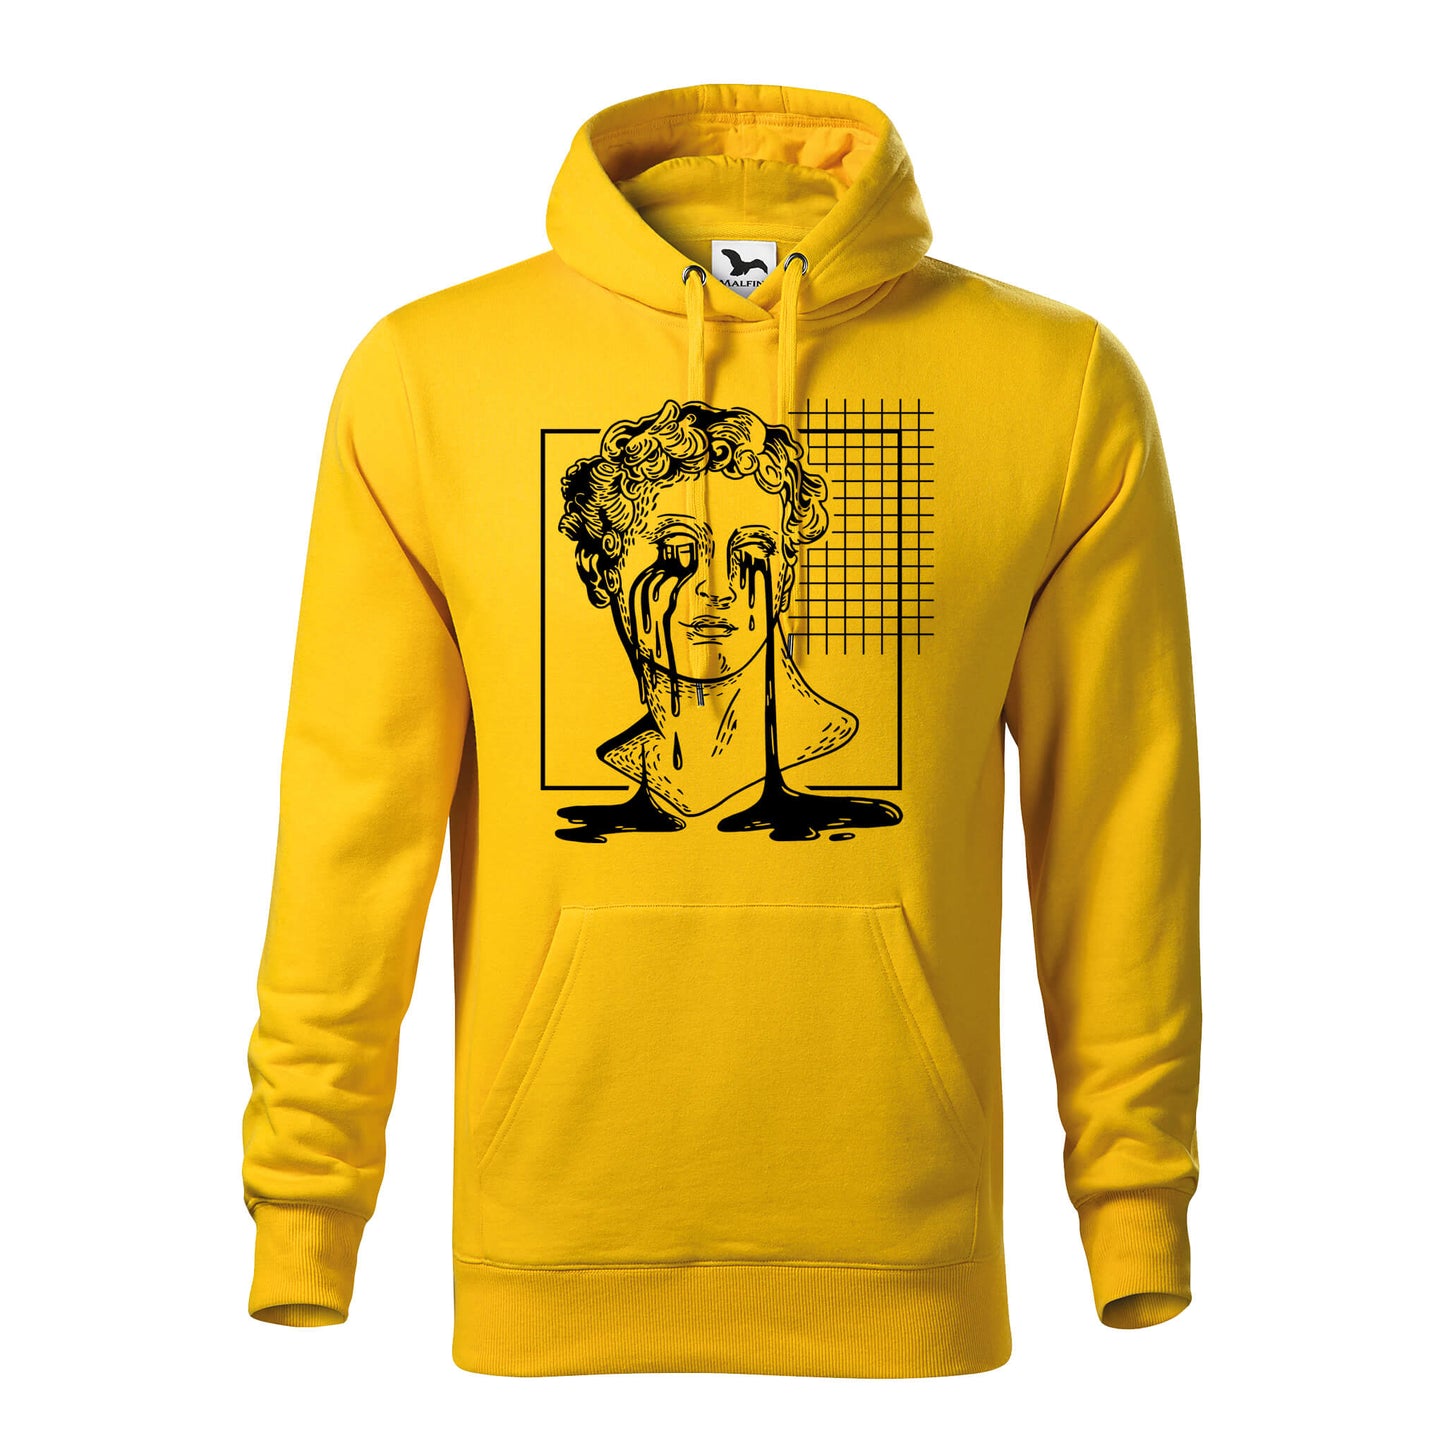 Bust crying hoodie - rvdesignprint